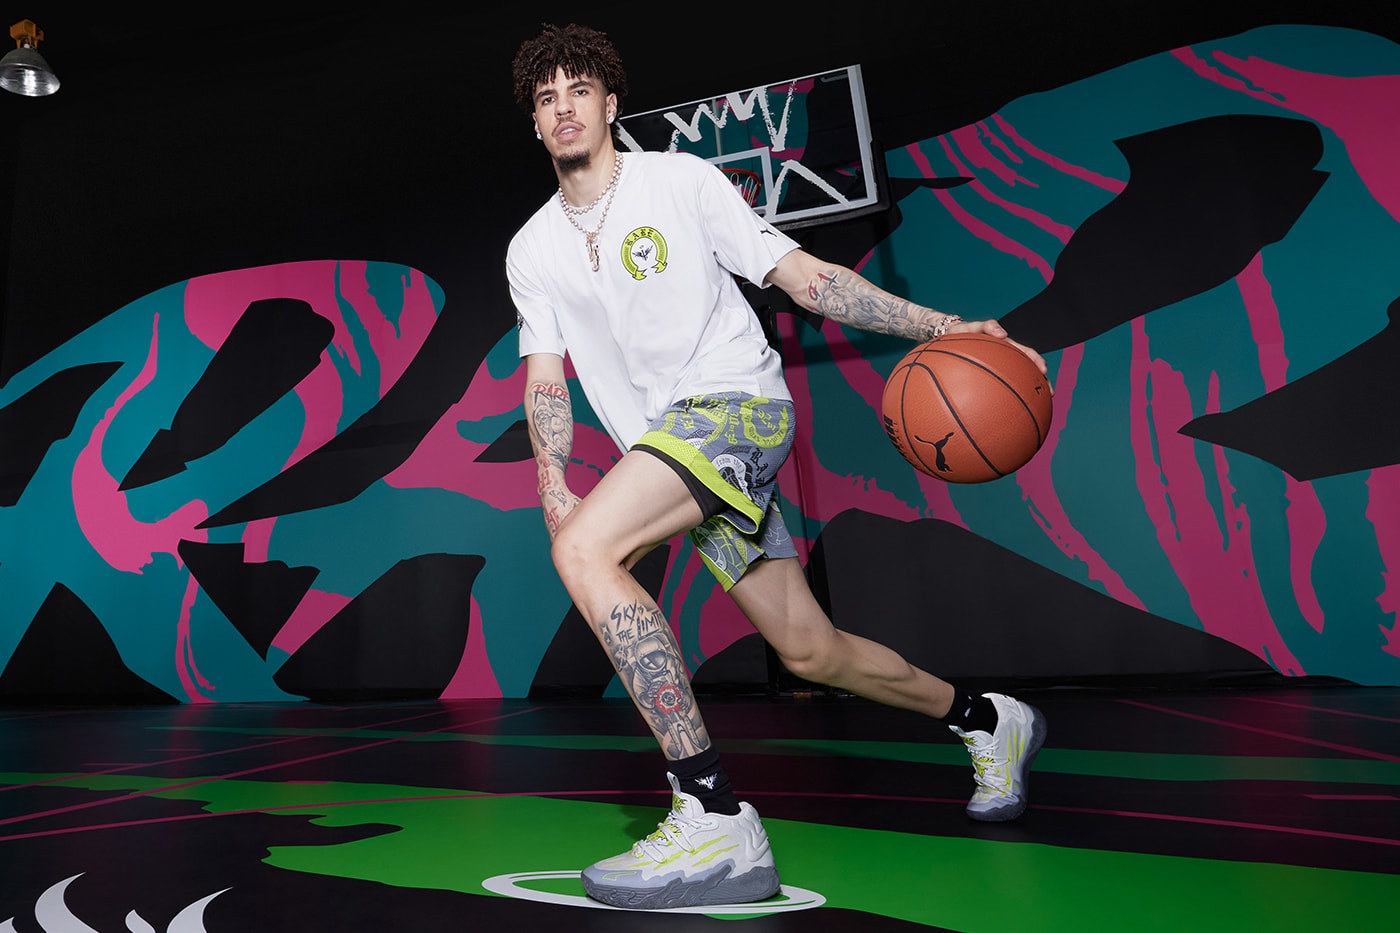 LaMelo Ball and Puma Drop the MB.03 "Chino Hills" Colorway 379235-01 Feather Gray/Lime Smash 